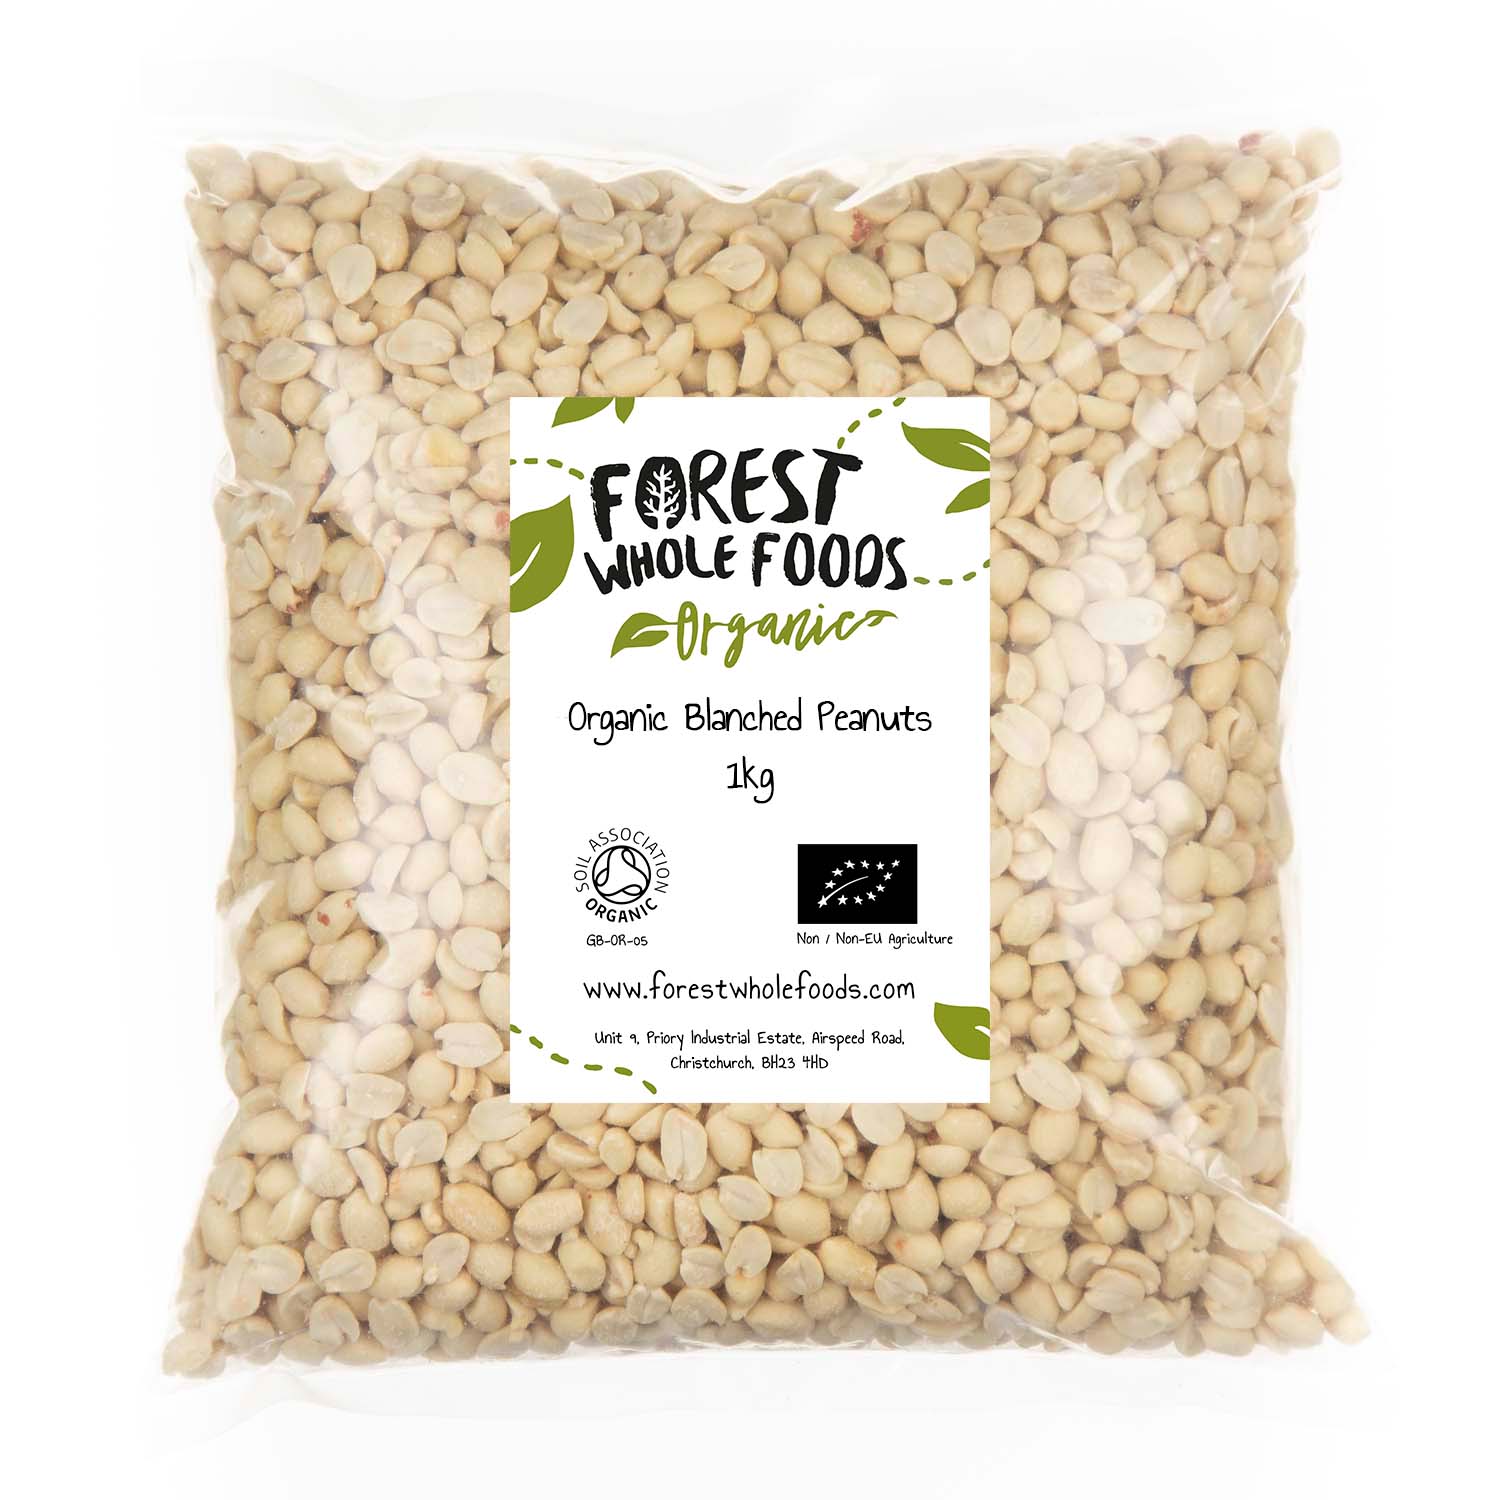 Organic Blanched Peanuts 1kg